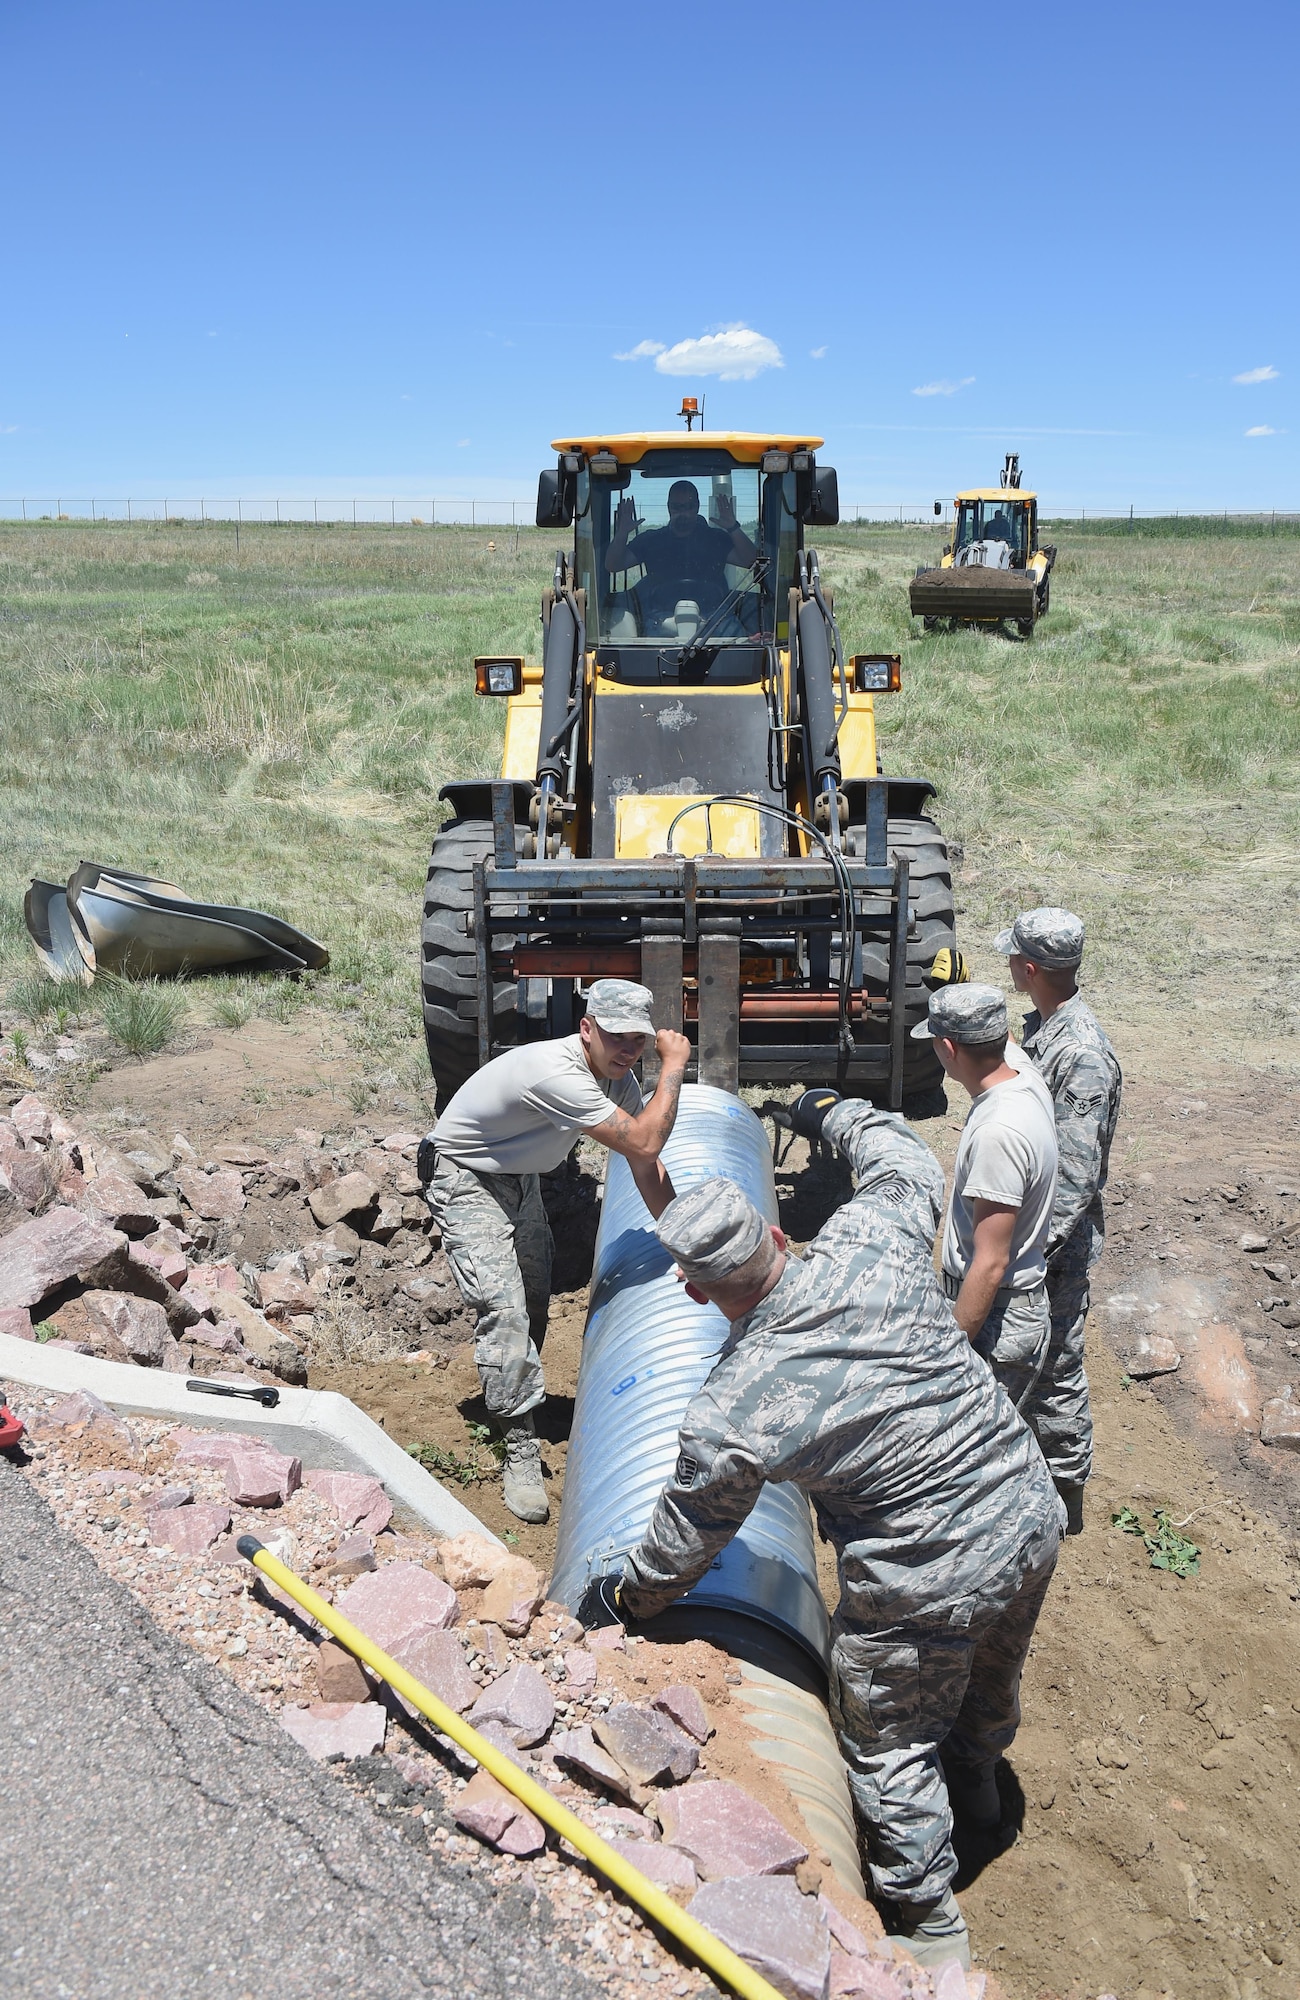 50th Civil Engineer Squadron members and 446th Civil Engineer Squadron reservists from Joint Base Lewis-McChord, Washington, install pipes at Schriever Air Force Base, Colorado Thursday, June 15, 2017. For 446 CES Airmen this has been an opportunity to become more proficient in their job and have diverse training opportunities. (U.S. Air Force photo/Senior Airman Arielle Vasquez)